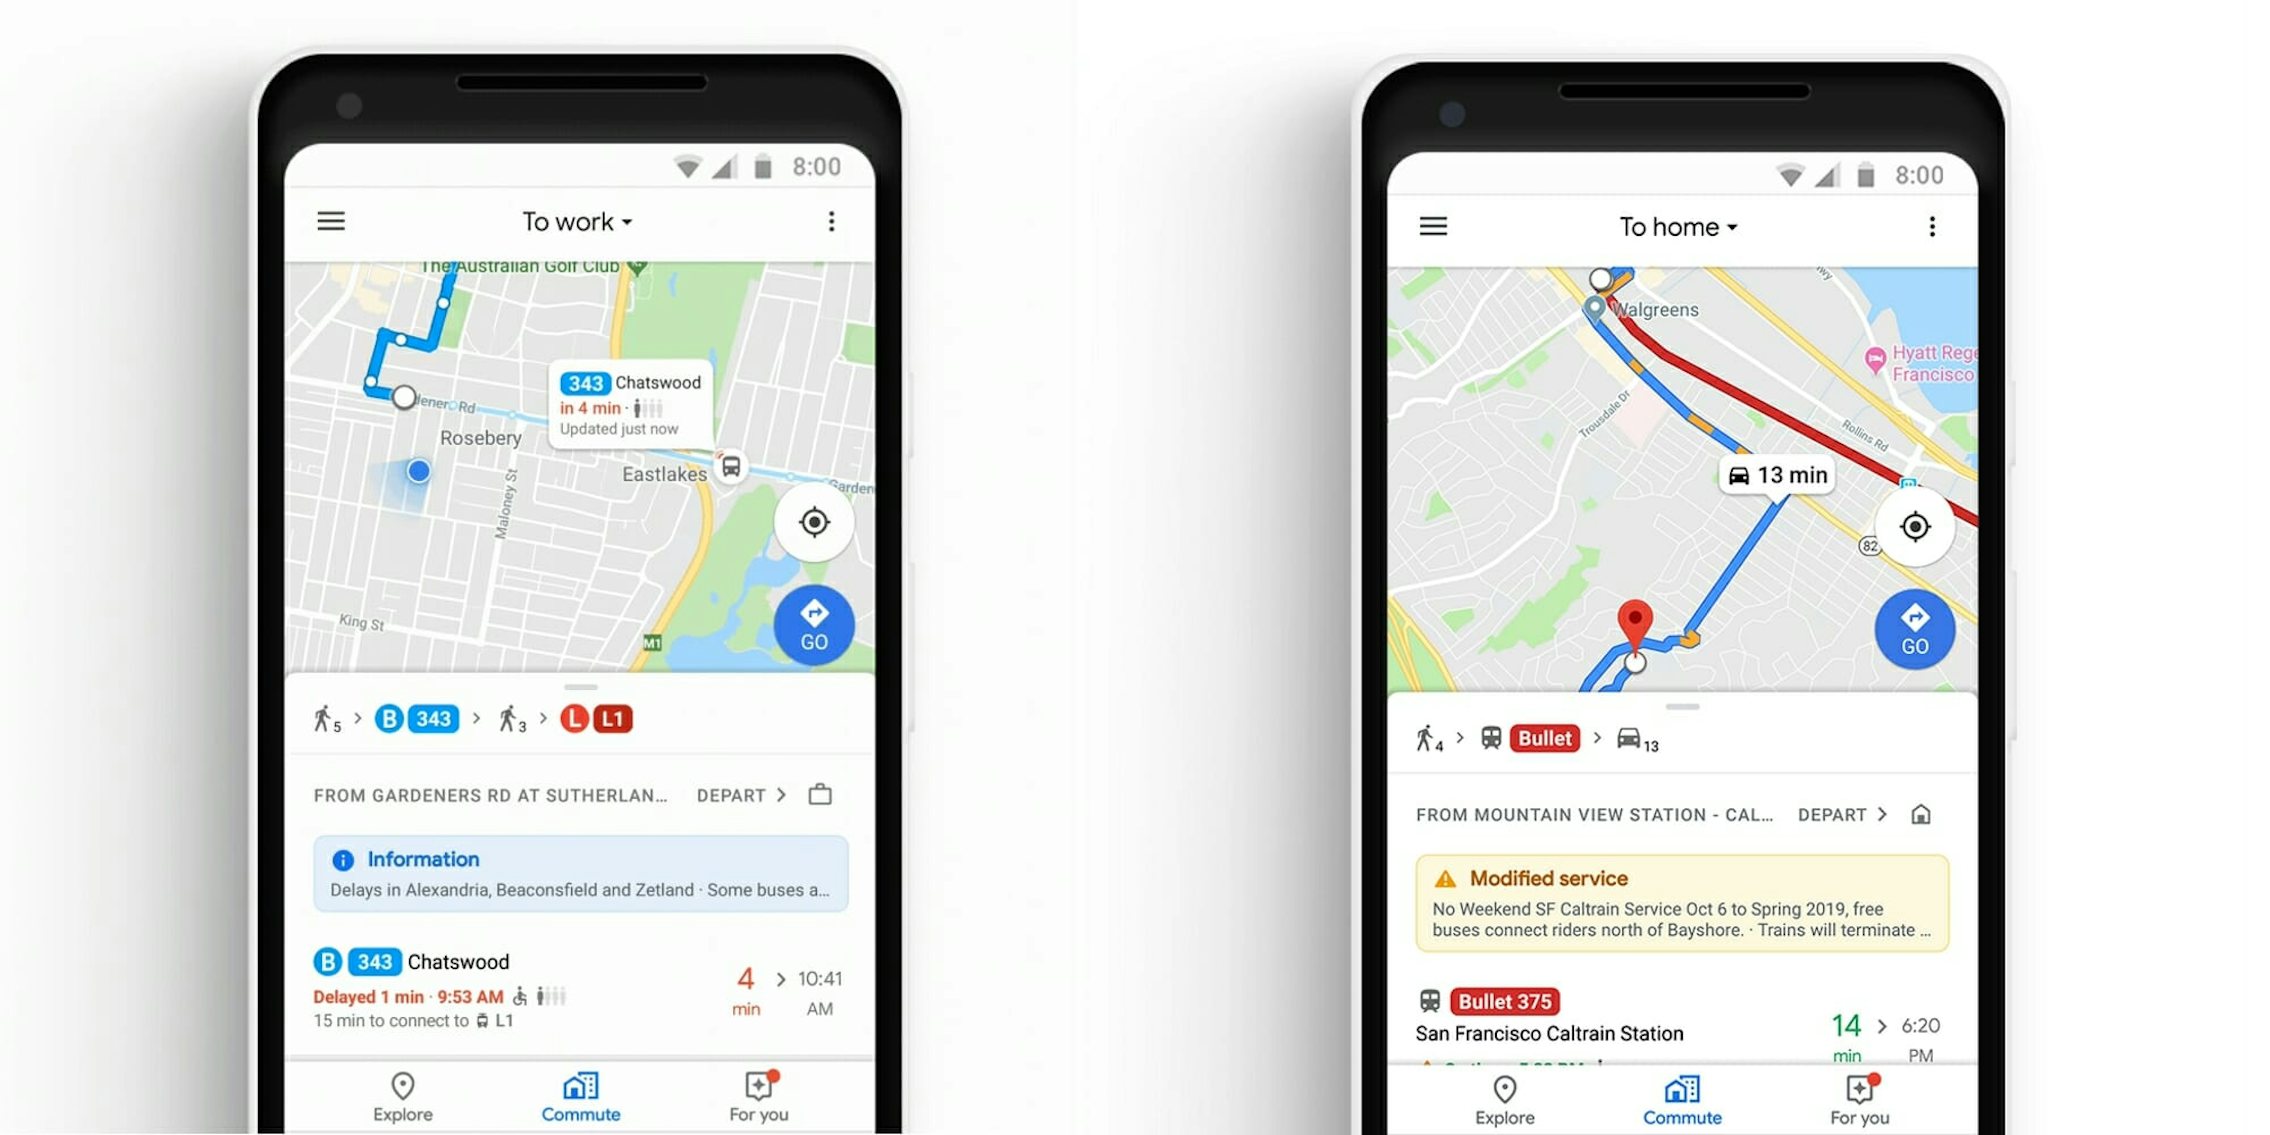 Google Maps is introducing new real-time tracking features for buses and trains.